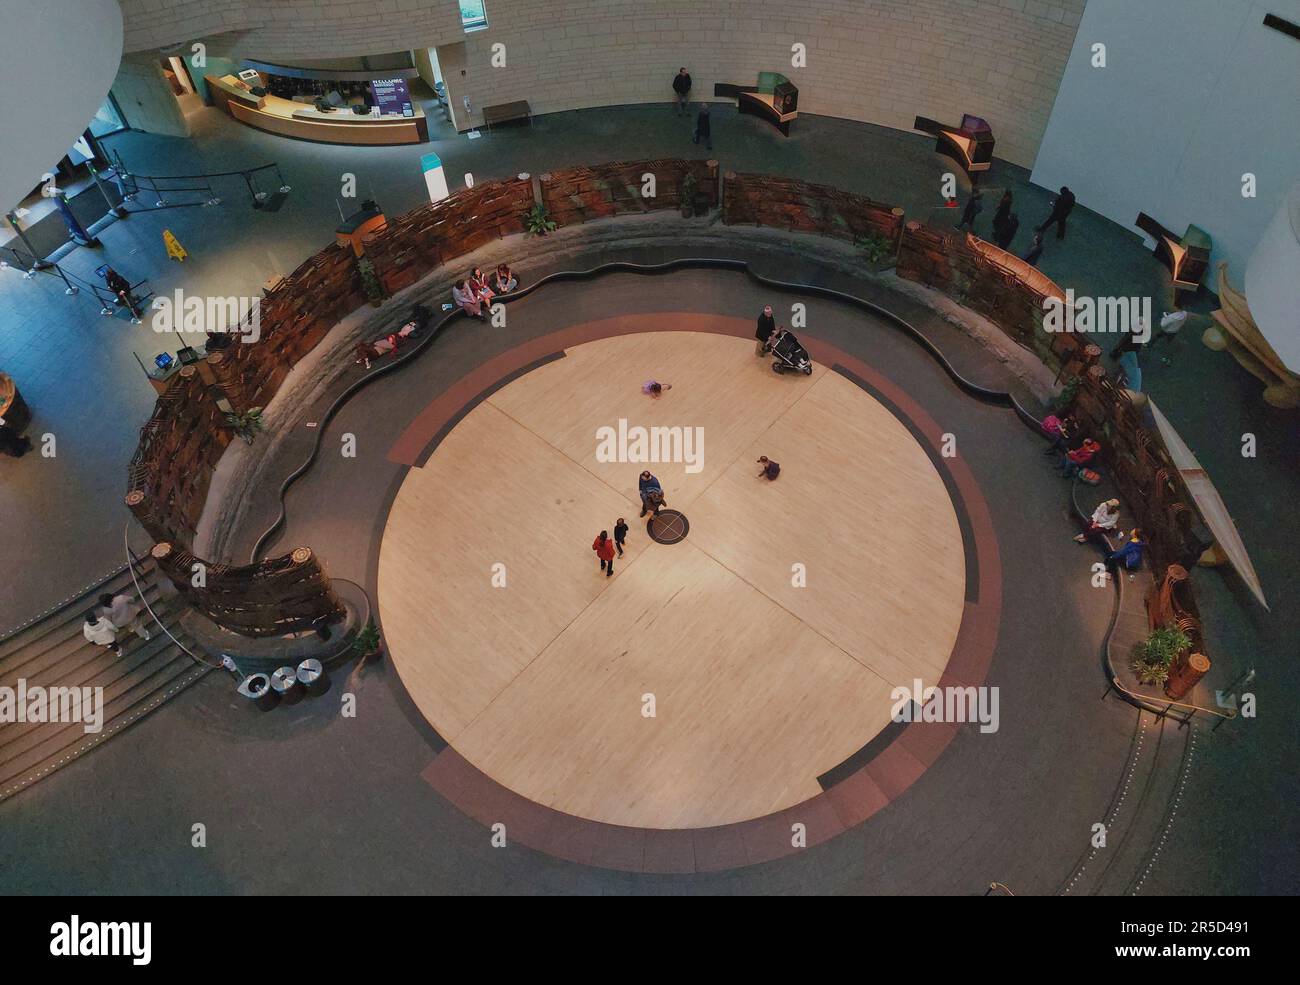 Das Foyer im National Museum of the American Indian in Washington DC, USA. Stockfoto